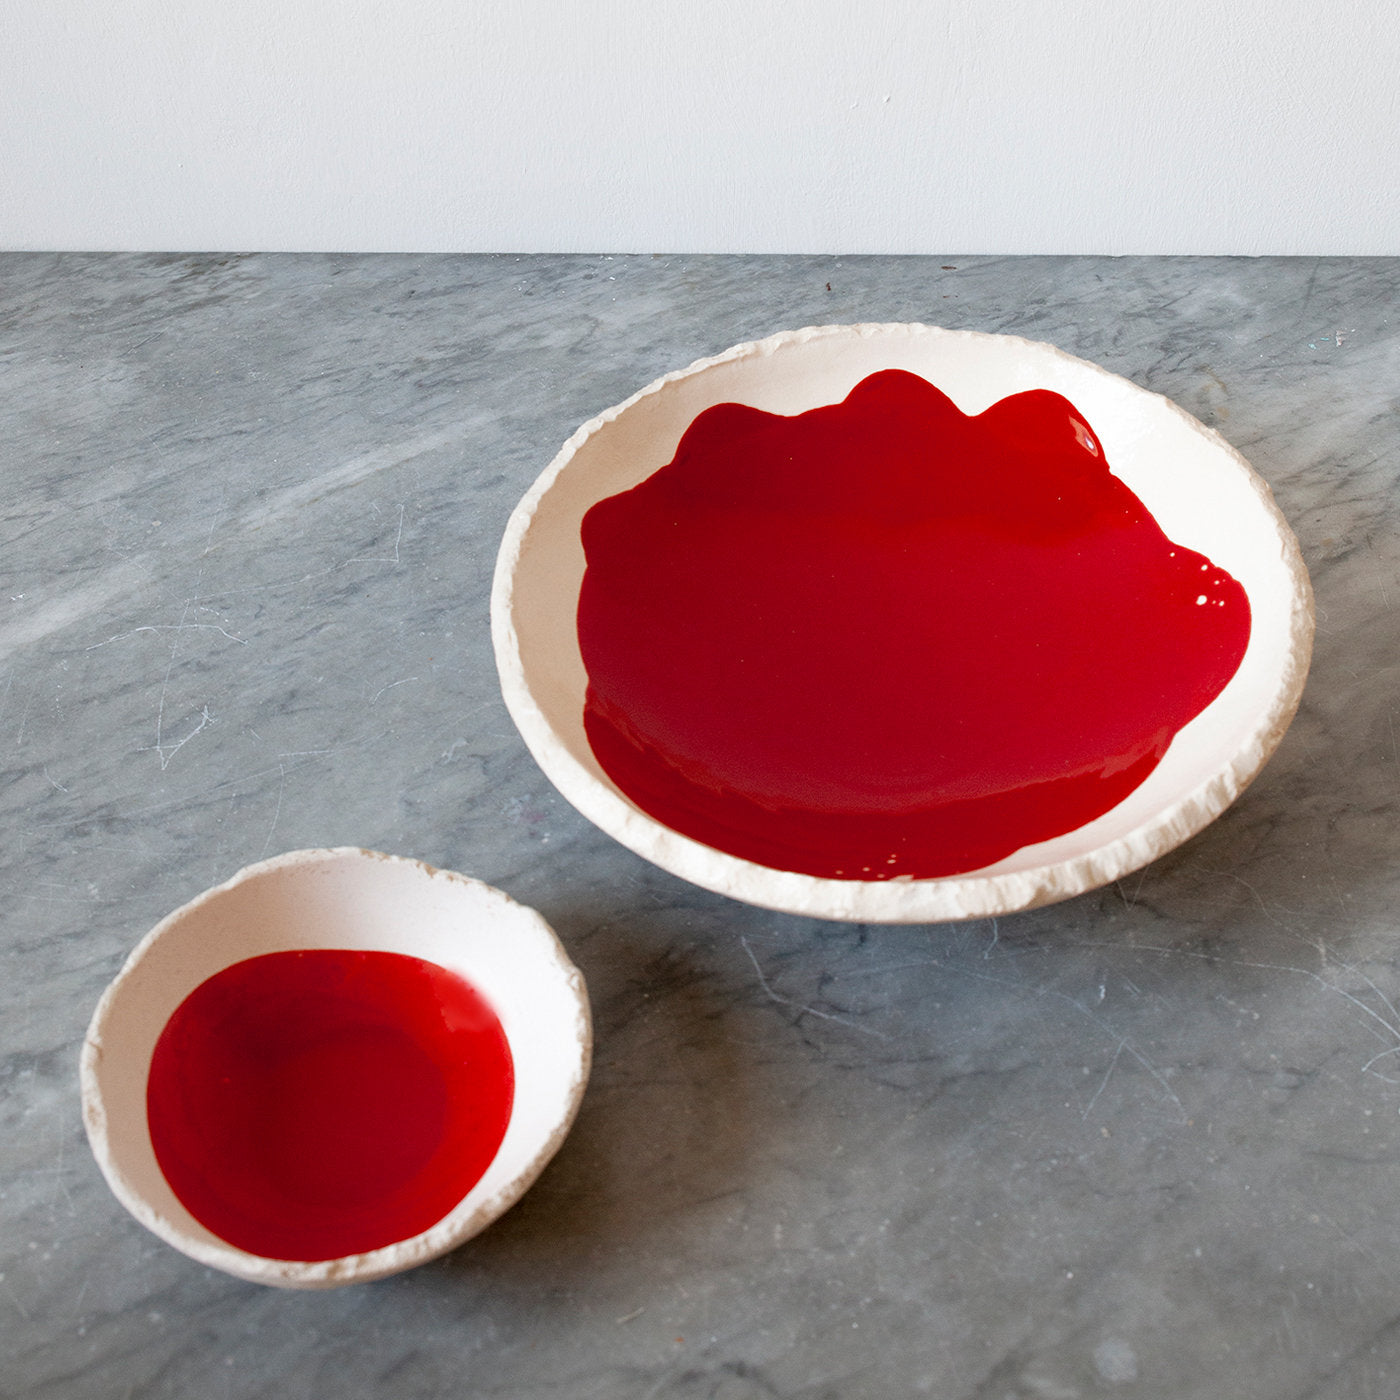 Gusci Large Red Bowl - Alternative view 1